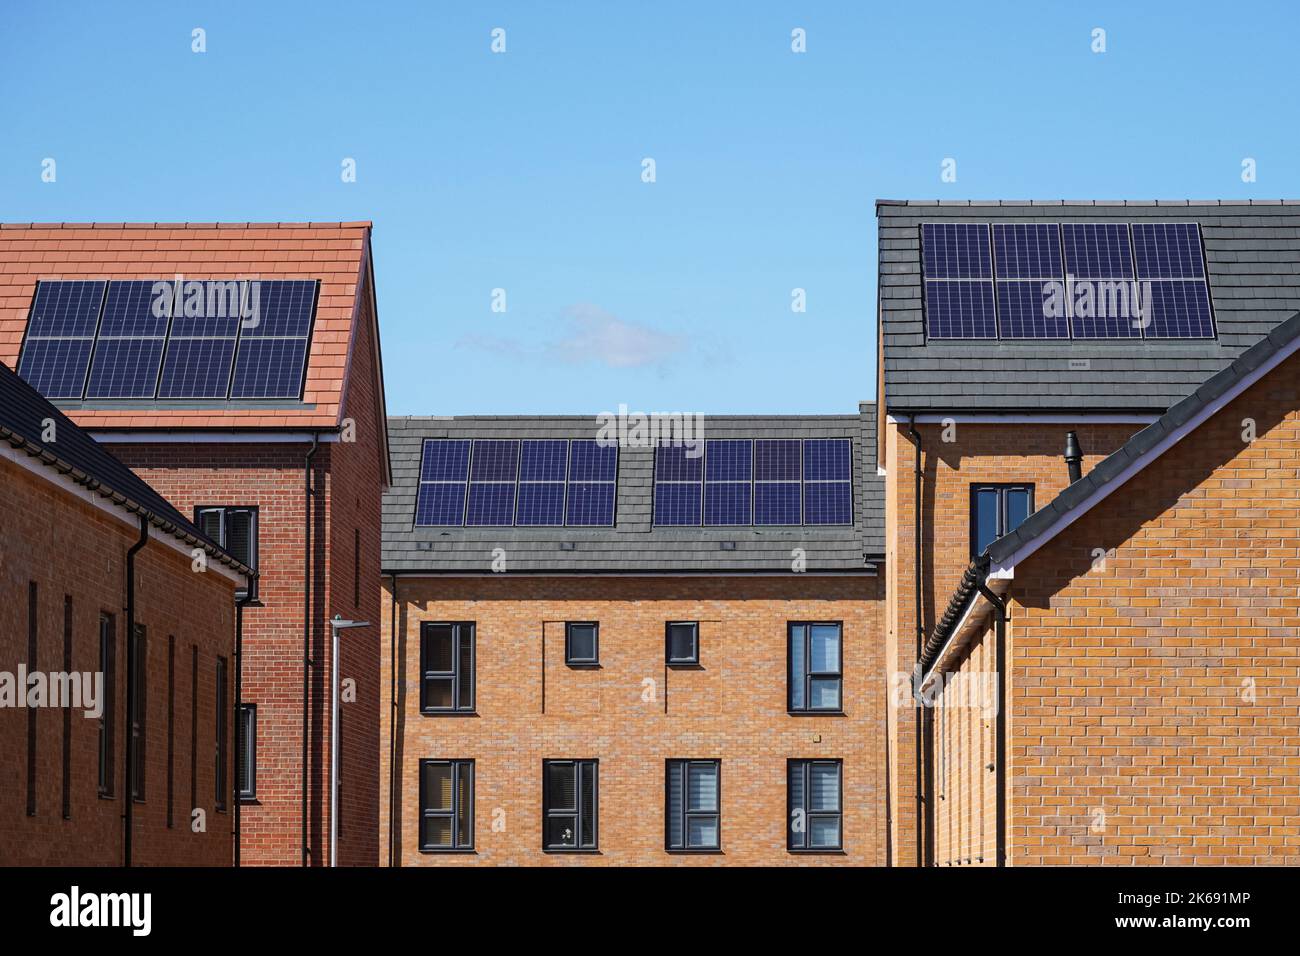 New modern apartment buildings with solar panels on the roof in London, England, United Kingdom, UK Stock Photo